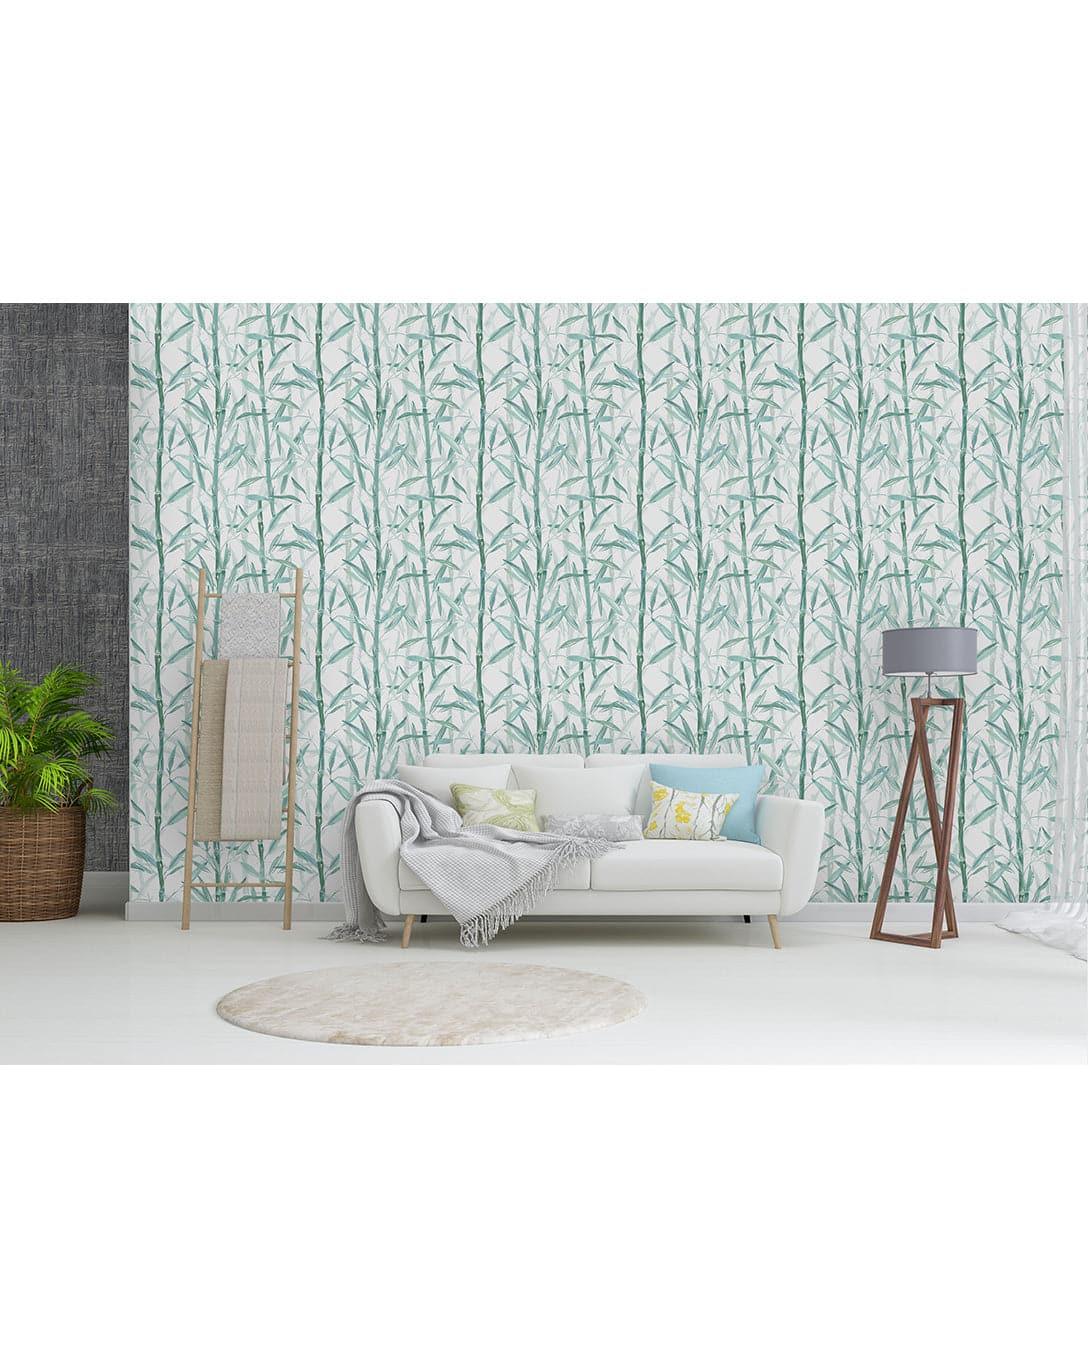 Watercolor Green Bamboo Removable Wallpaper 